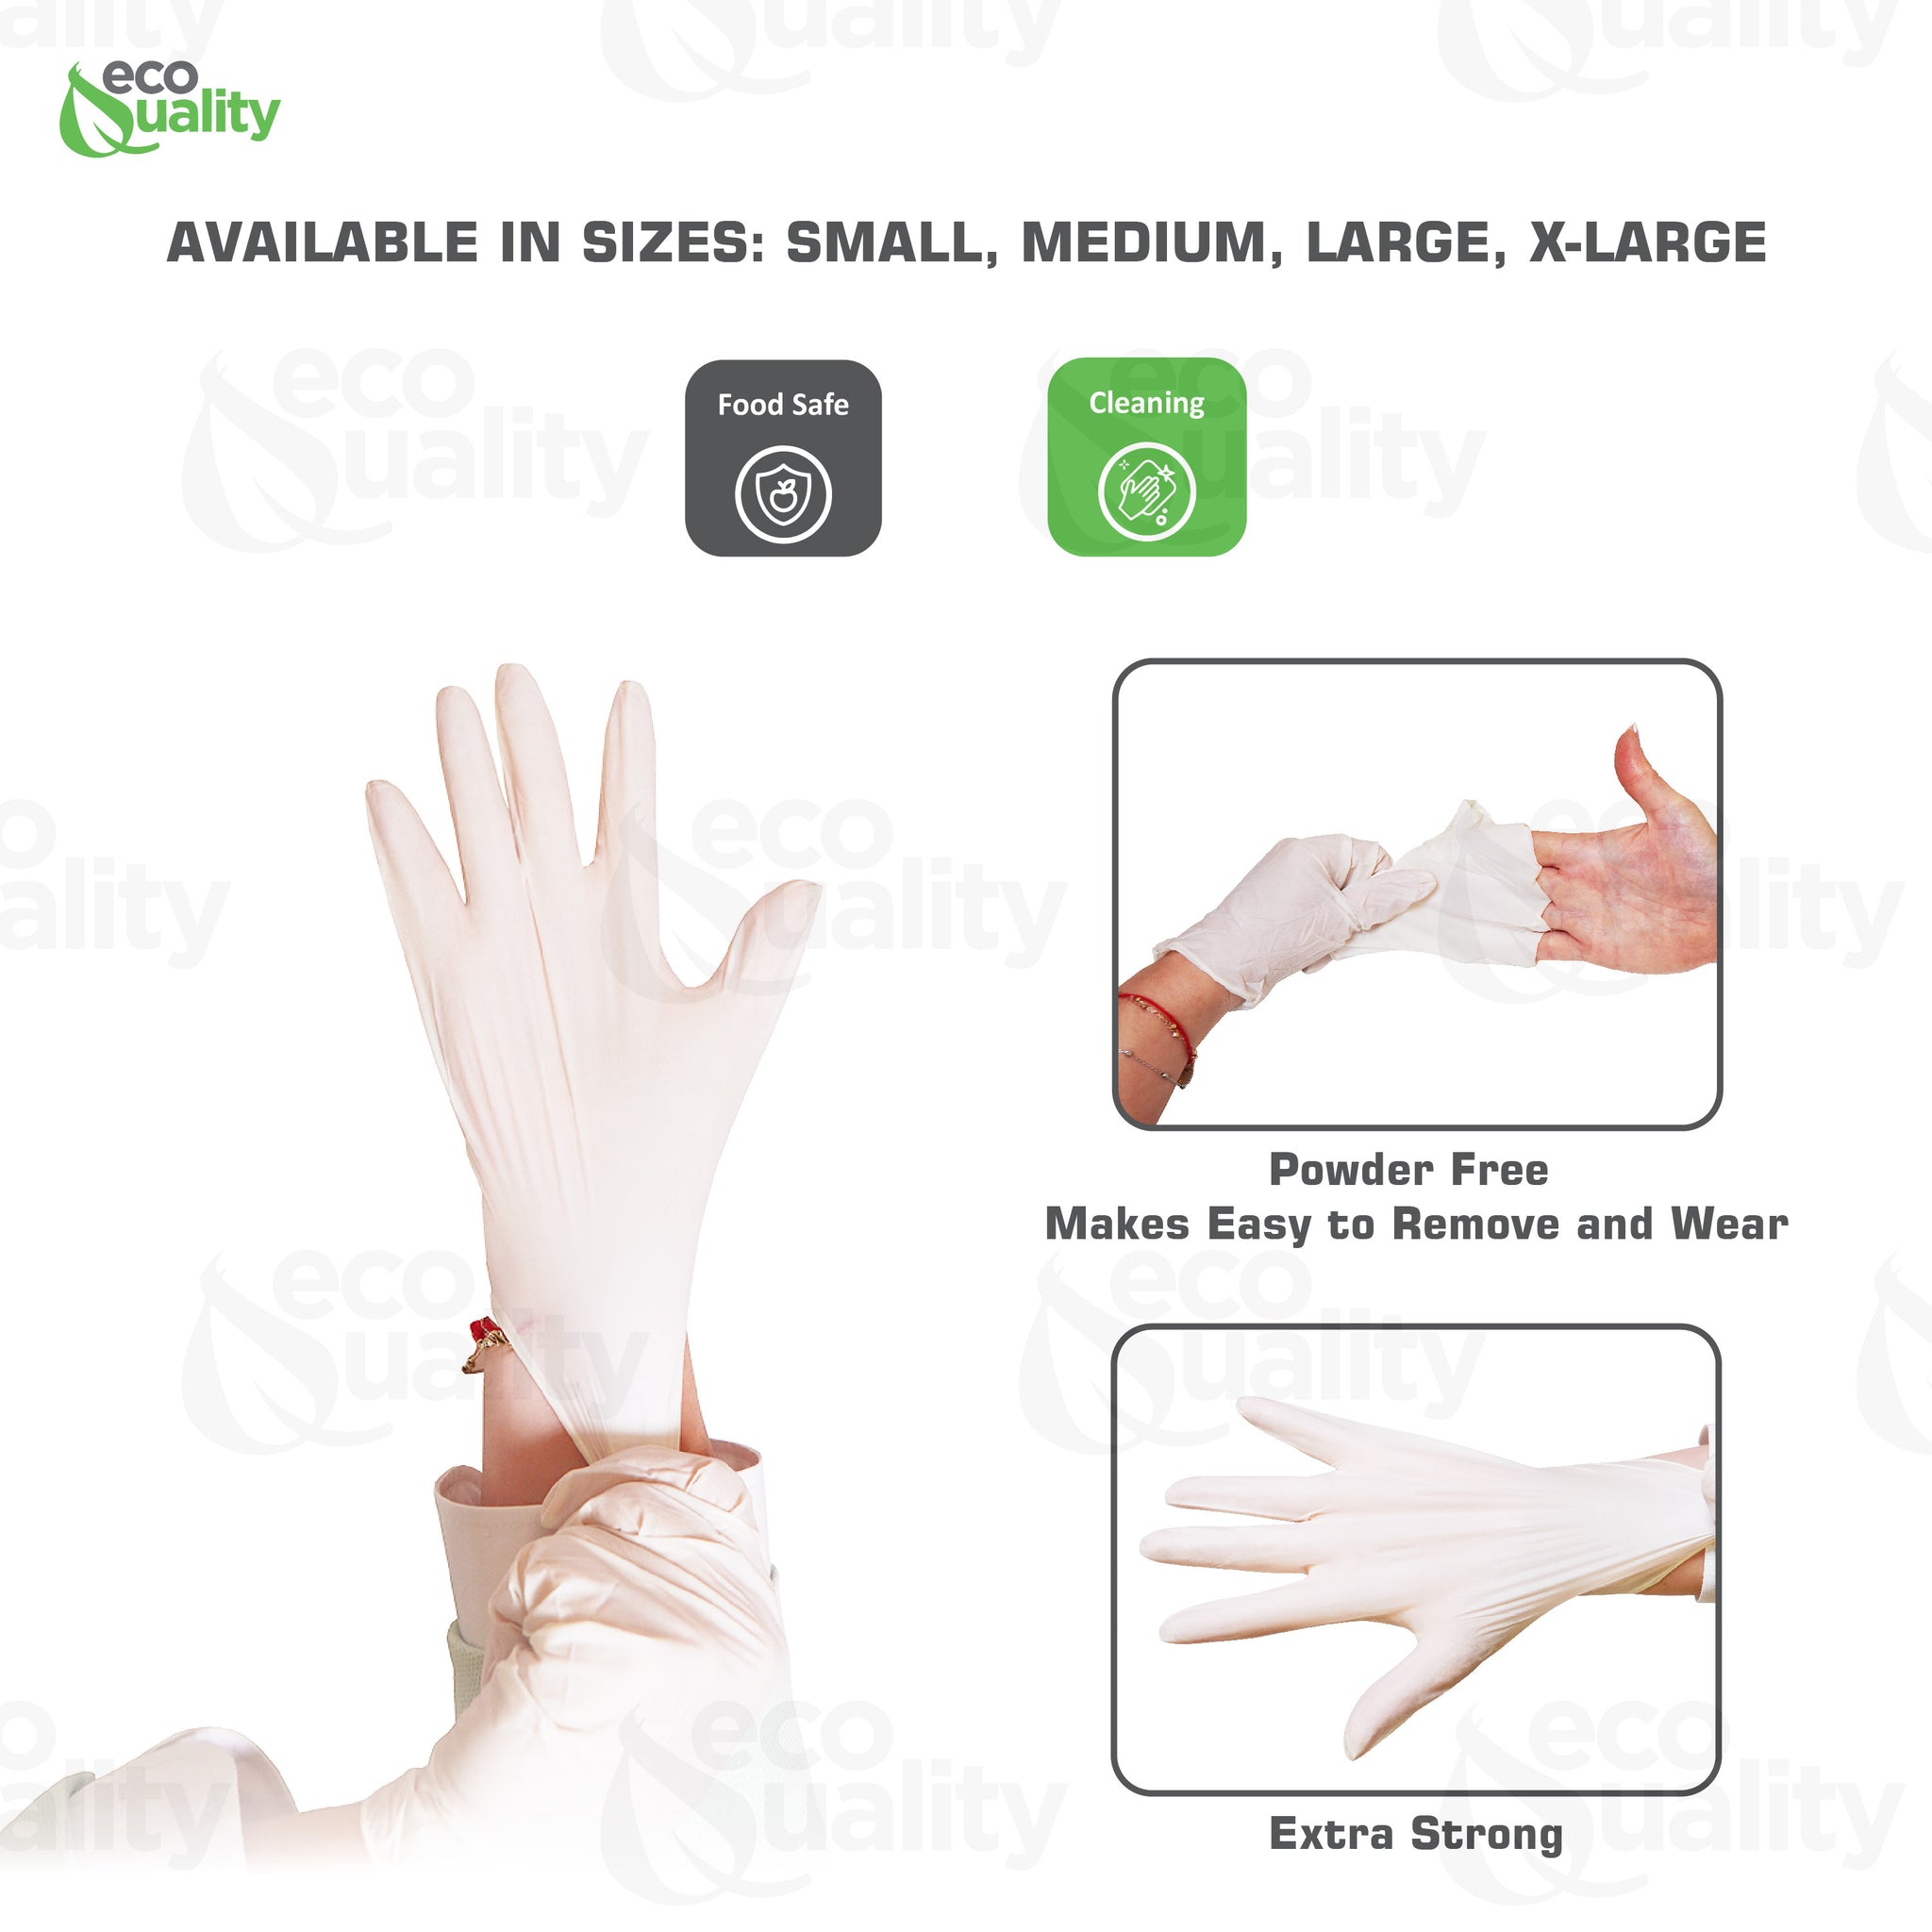 Restaurant Hotel Commercial Wholesale Gloves  White Clear Gloves  stretchable durability and puncture resistance  Plastic Gloves  Latex Powder Free Gloves  Gloves  Food Service Restaurant Kitchen Cleaning Janitorial Gloves  Food Grade Gloves  Food Gloves  Disposable Plastic Gloves  Disposable Gloves  5 mil White Clear Small